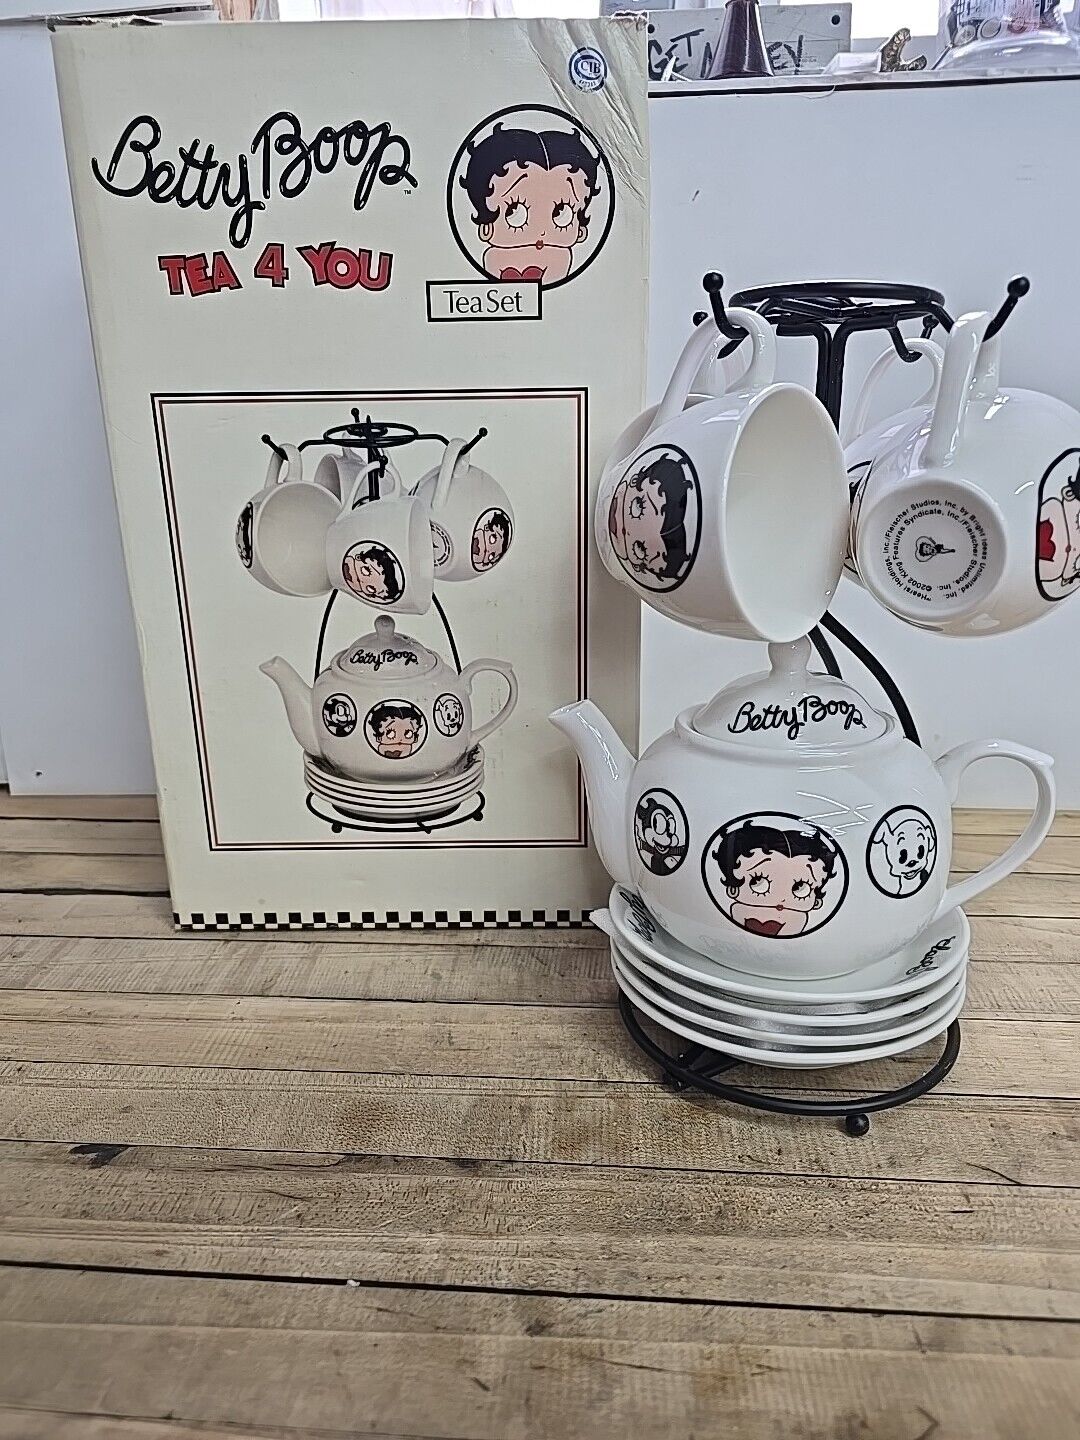 VINTAGE BETTY BOOP Tea Set with caddy, Tee for four with Betty Boop Bright Ideas